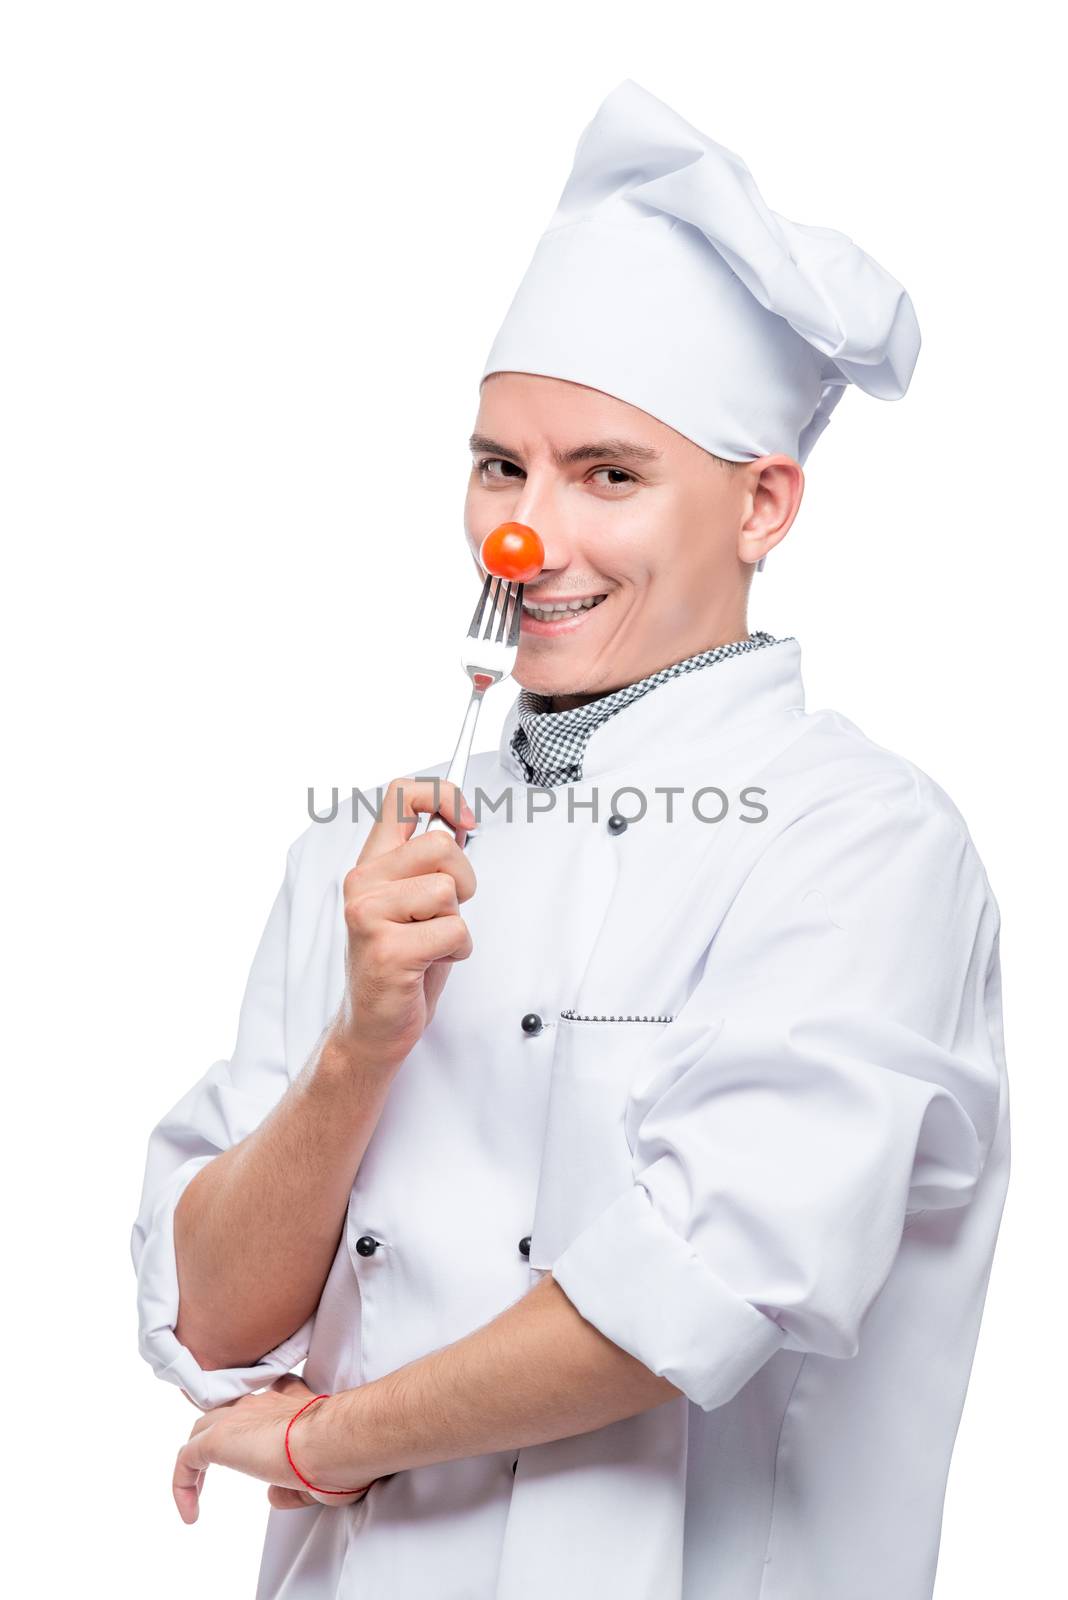 cooks with cherry tomato on a fork, shot on a white background i by kosmsos111